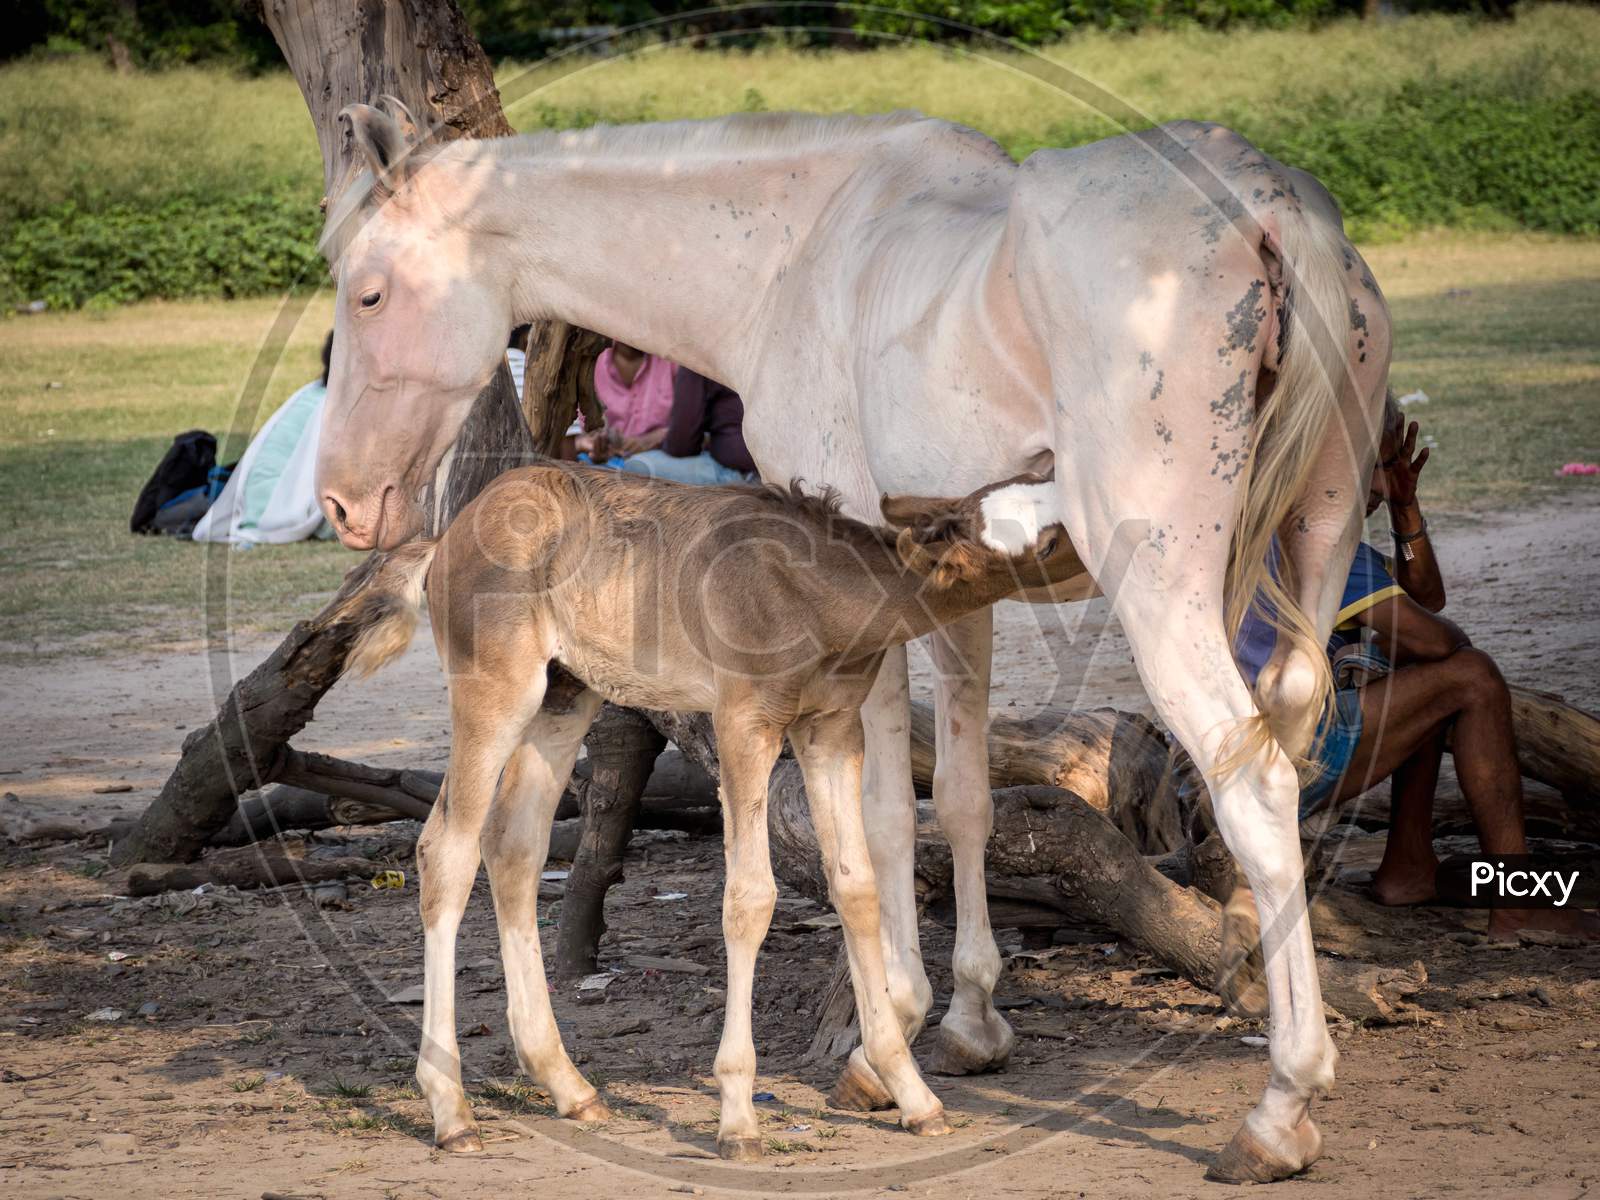 Mother Horse Feeding Her Foal, Baby In Countryside, Farming.